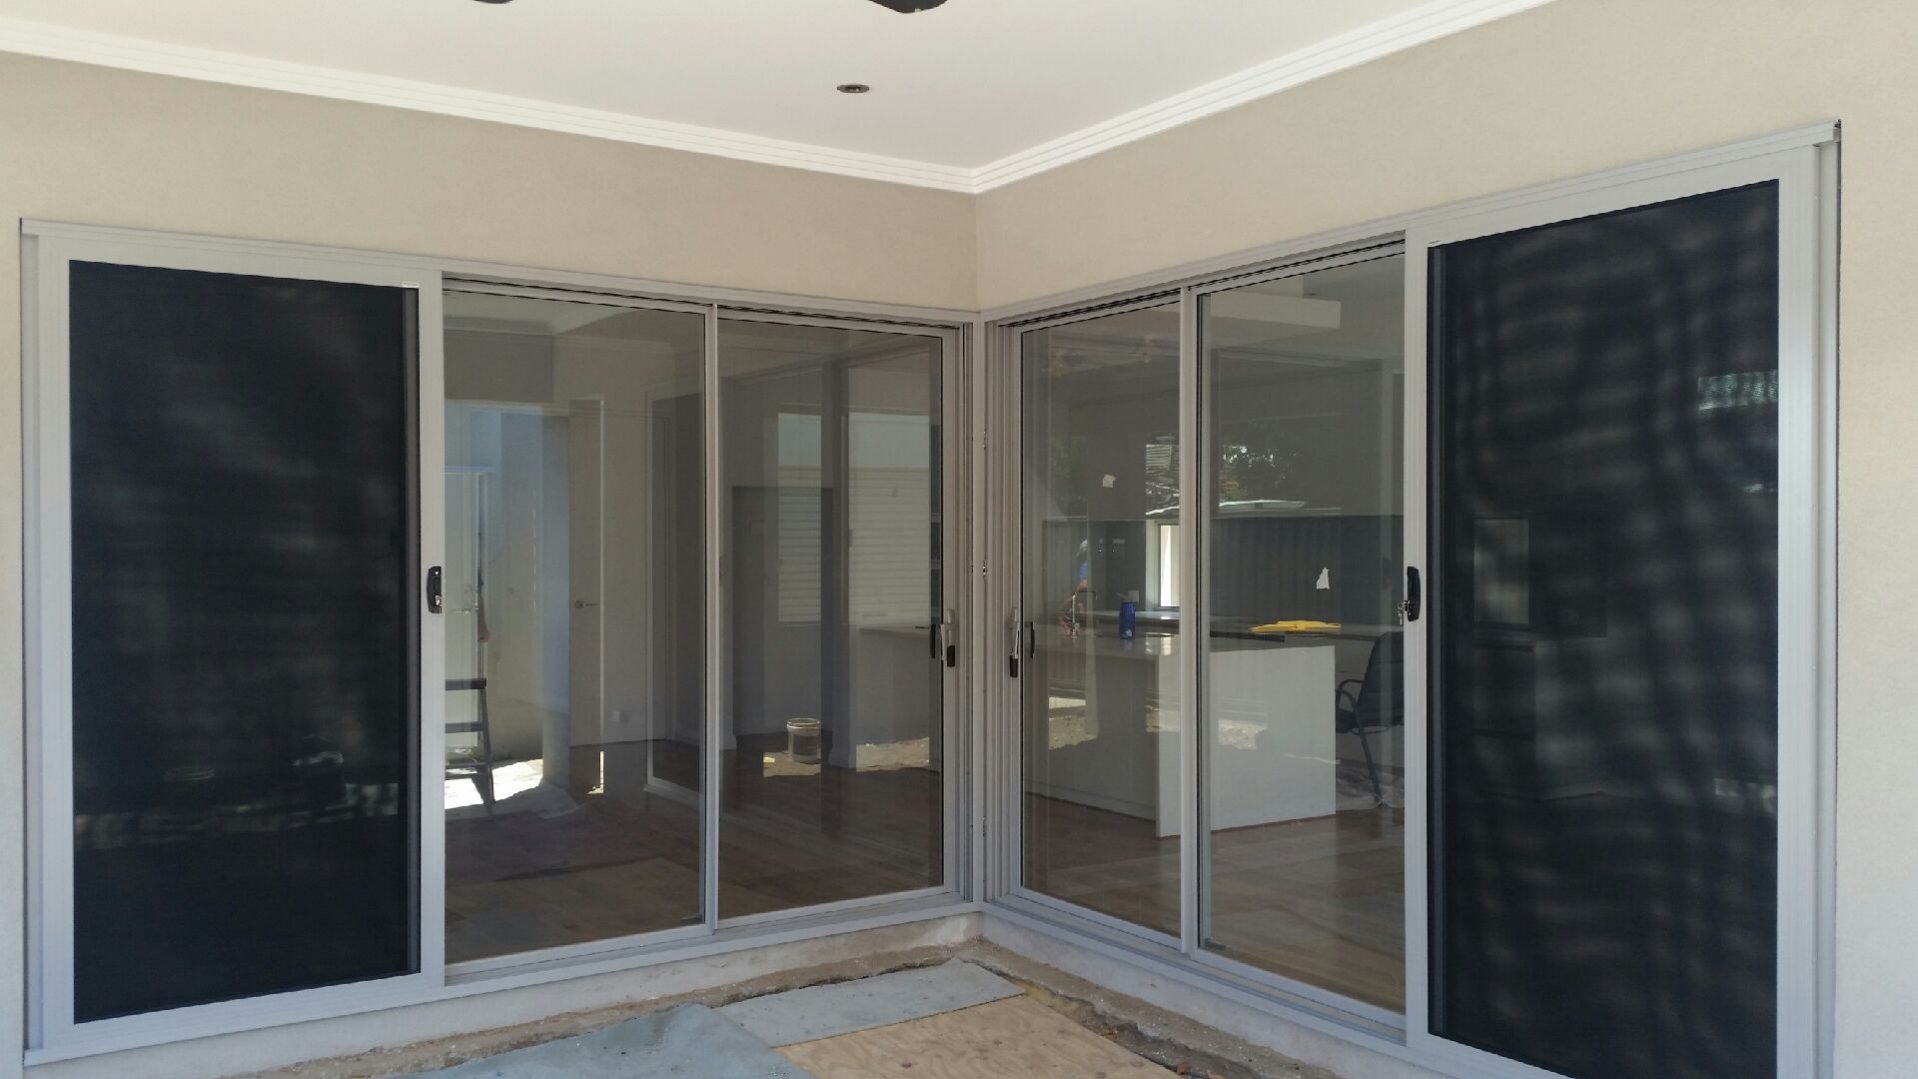 The alfresco area of a house which has double sliding security doors installed.